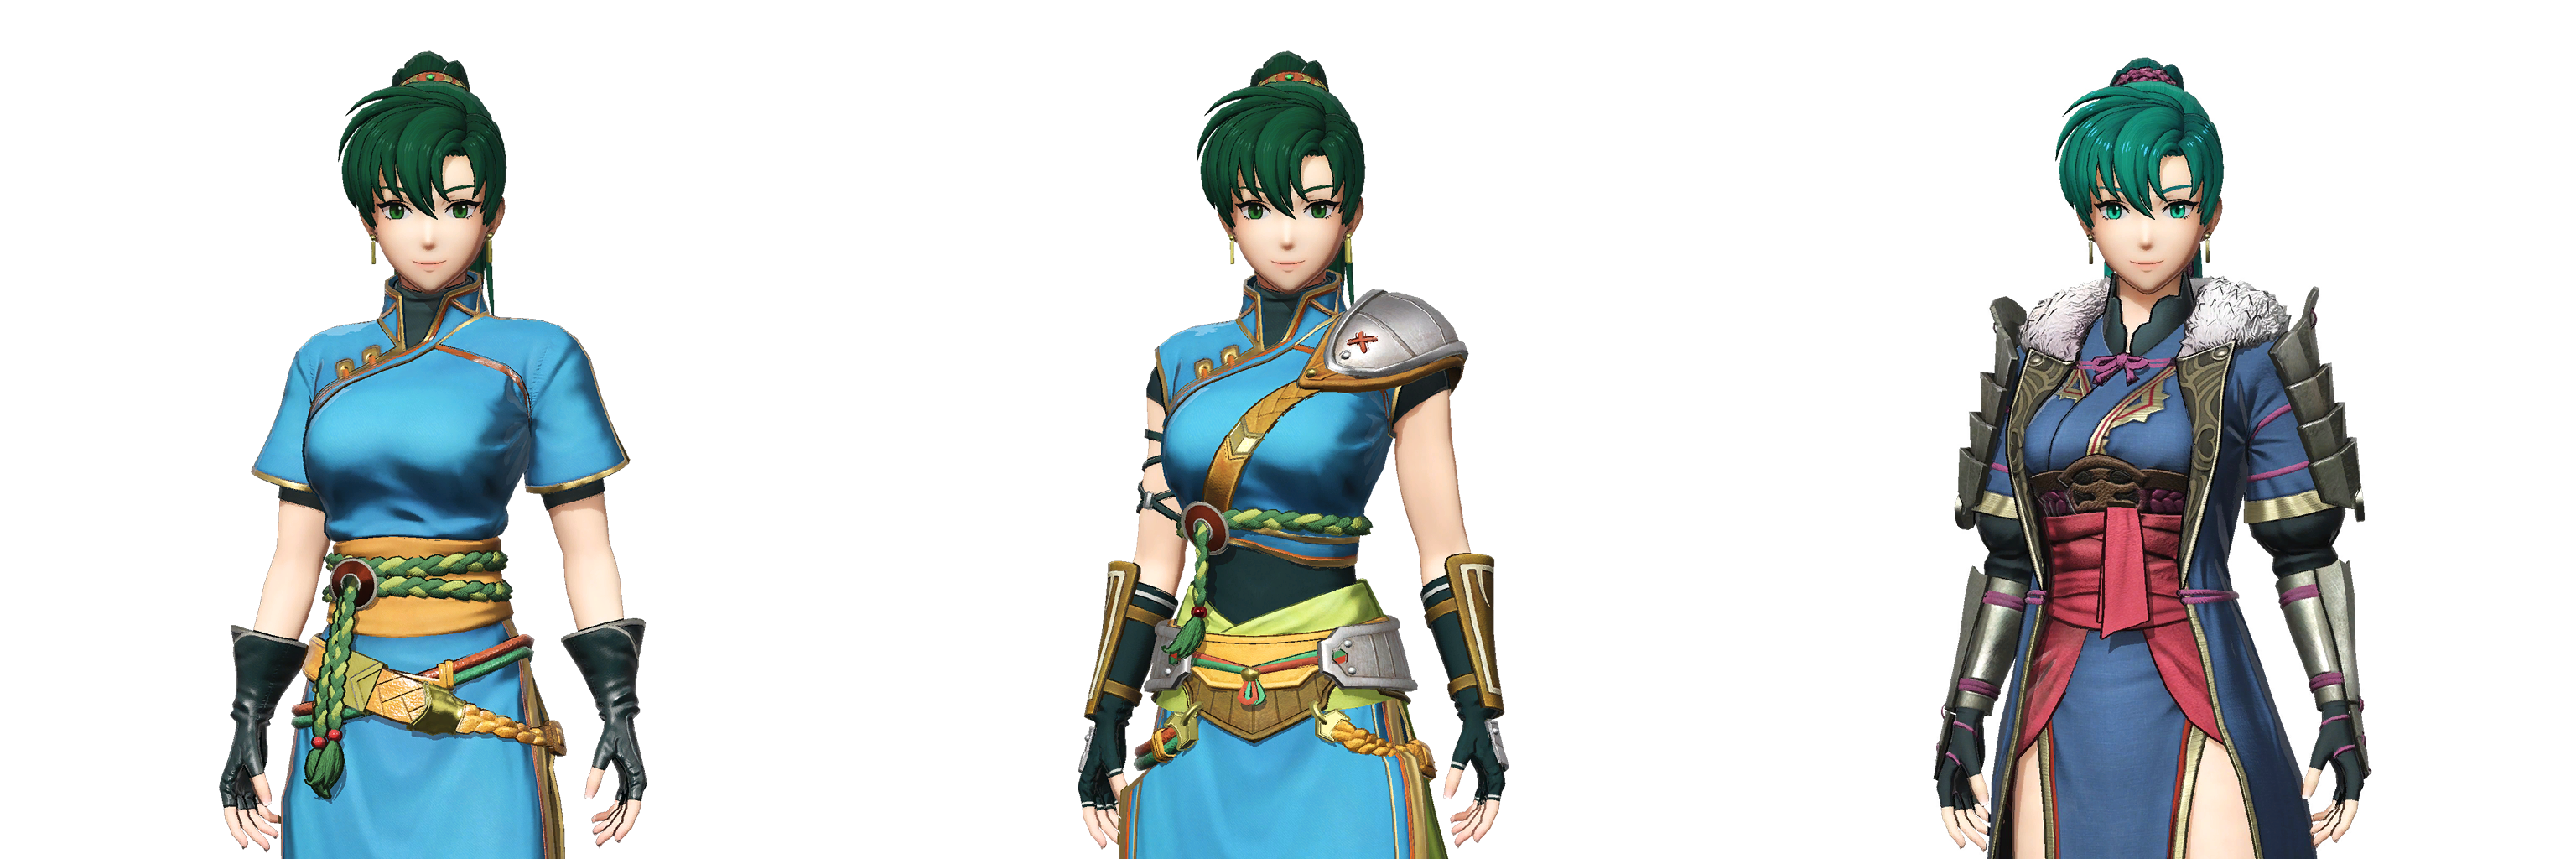 who does lyn marry in fire emblem